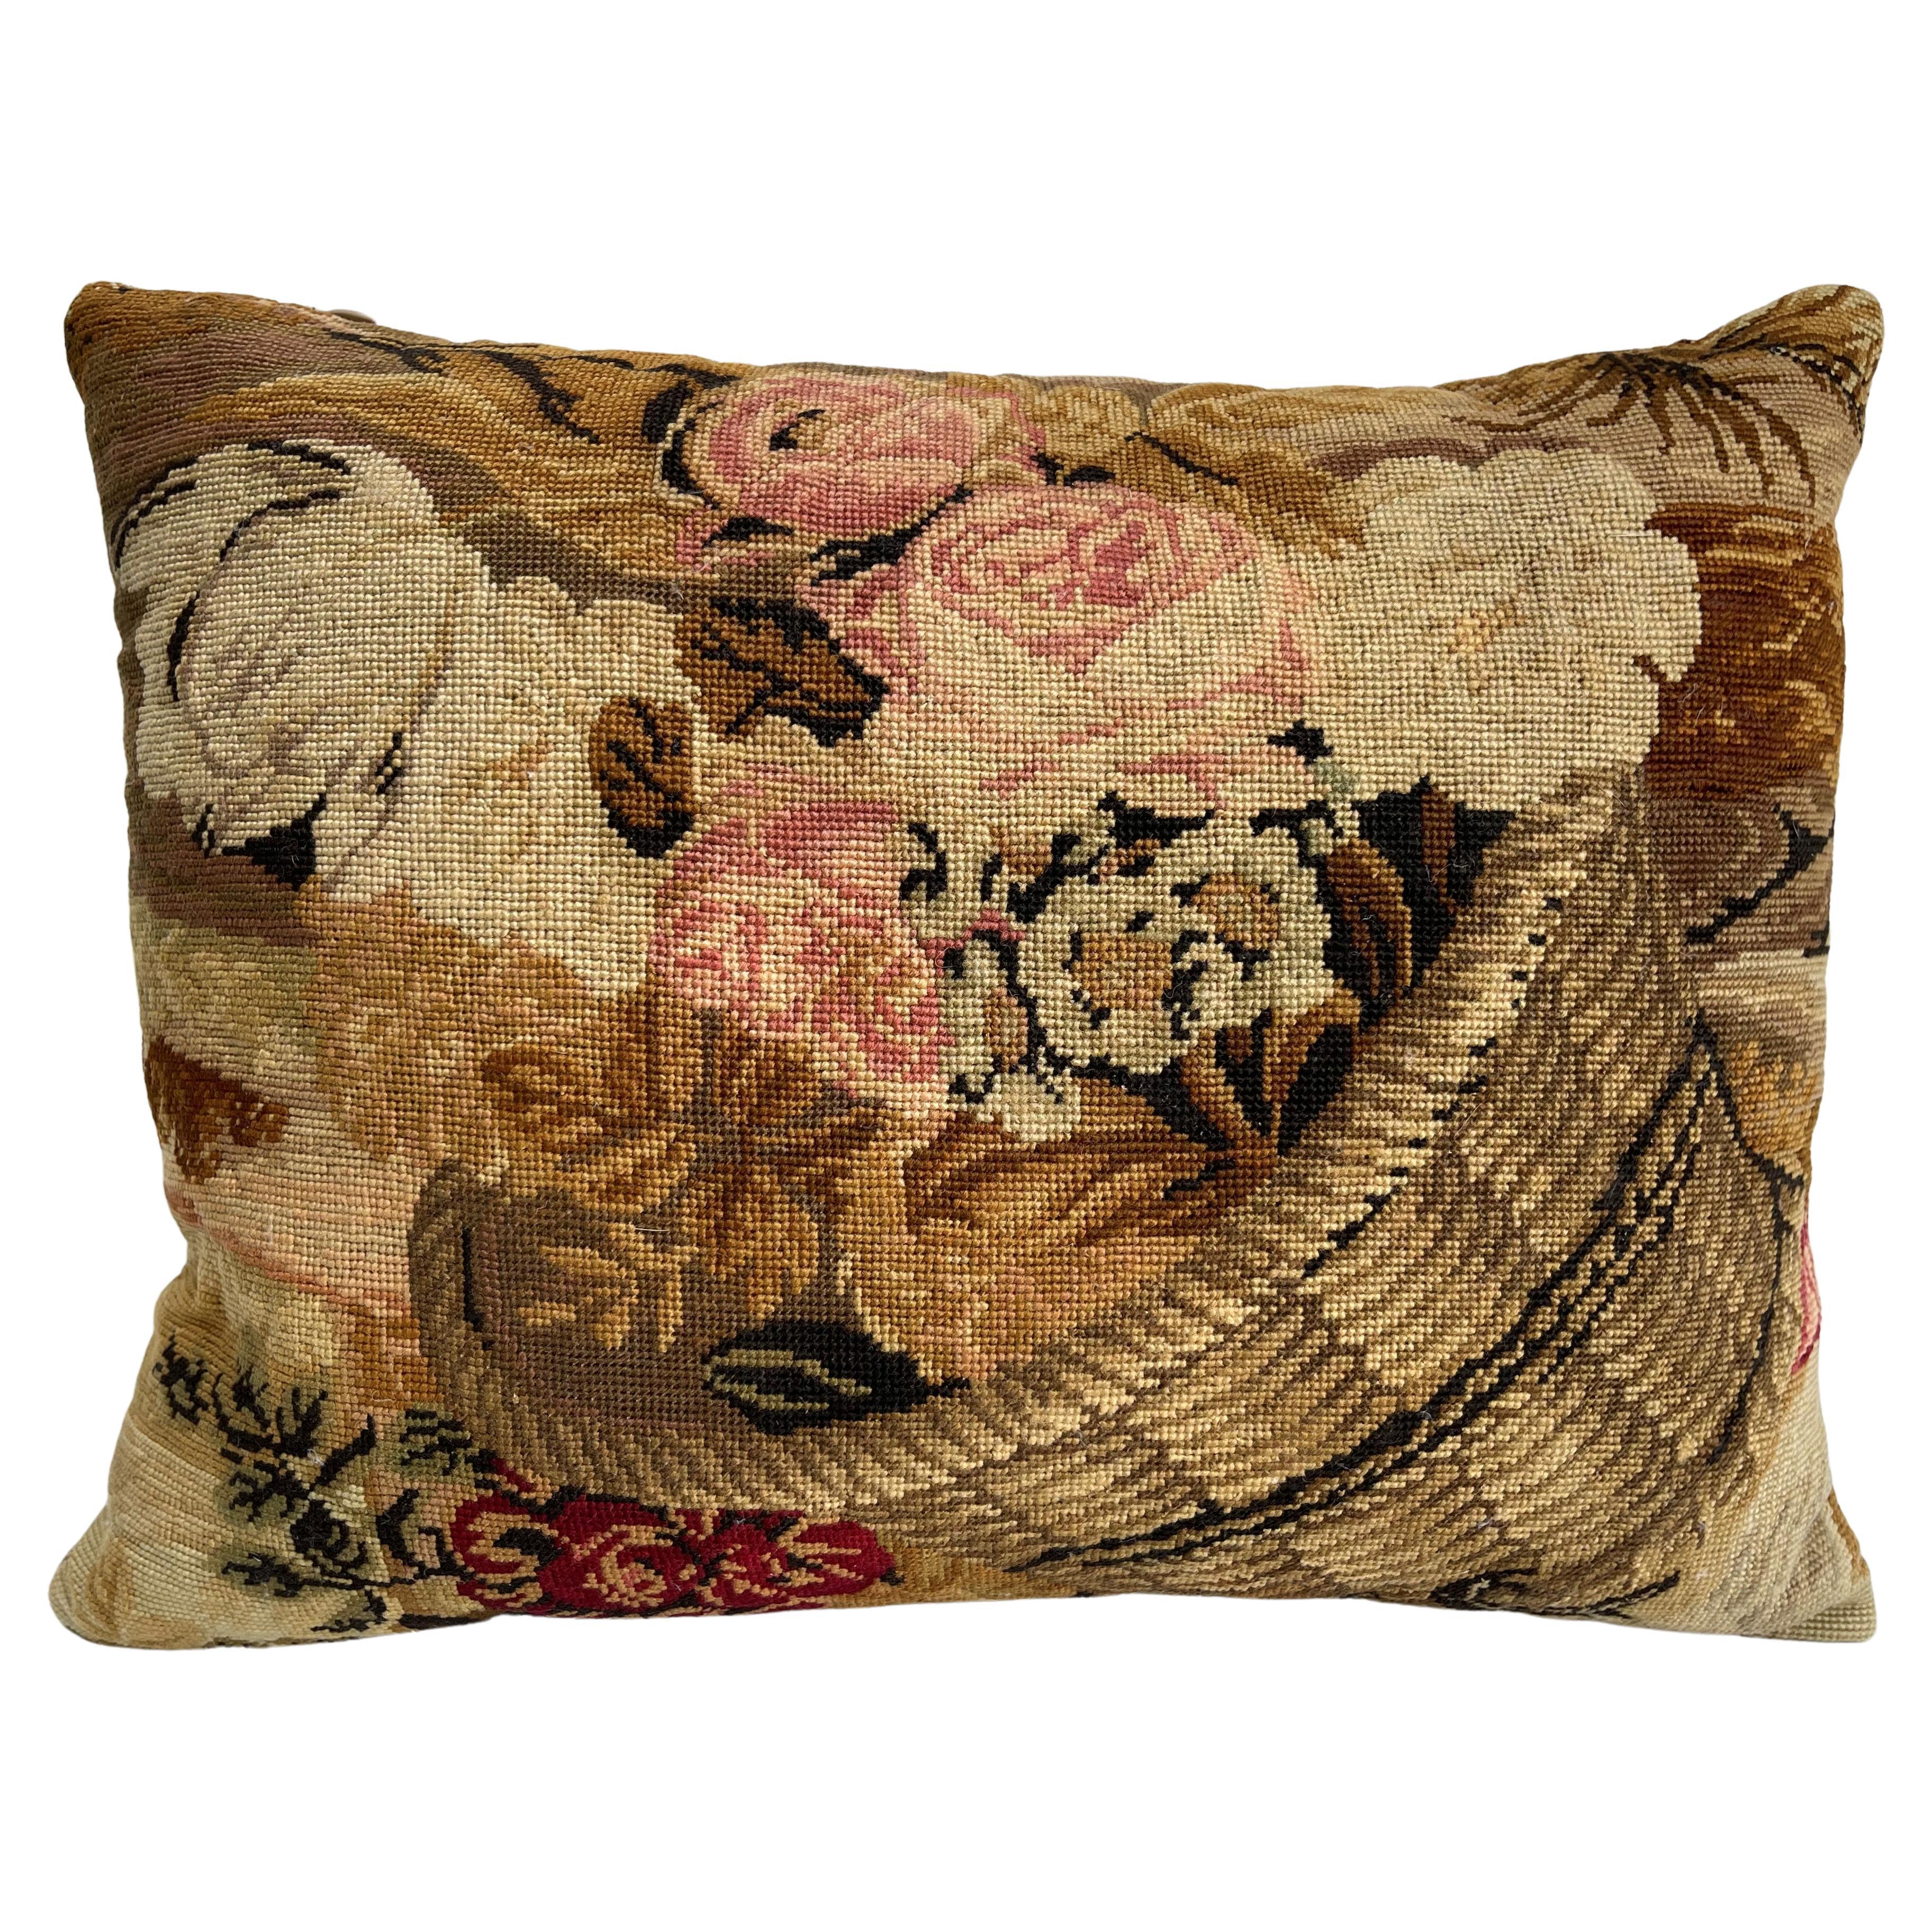 Early-19th Century English Tapestry Pillow - 15" X 10" For Sale